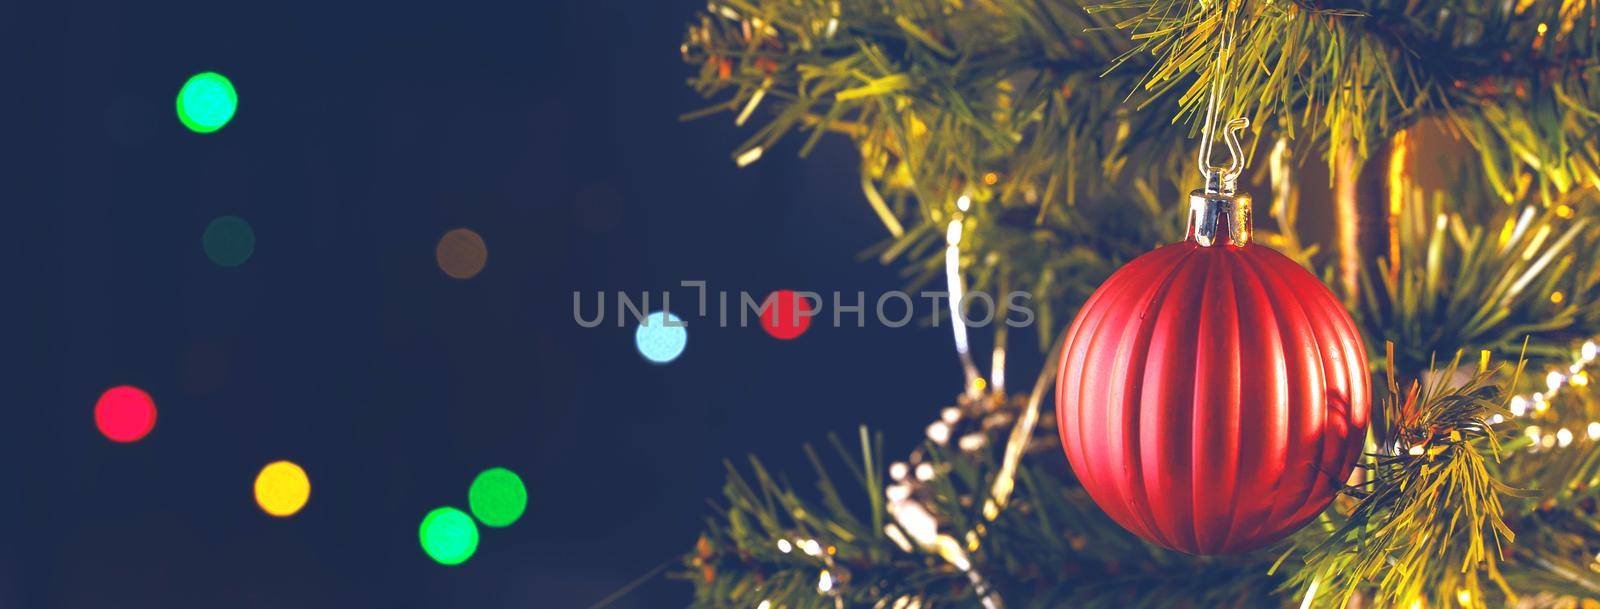 Beautiful Christmas decor concept, bauble hanging on the Christmas tree with sparkling light spot, blurry dark black background, macro detail, close up.